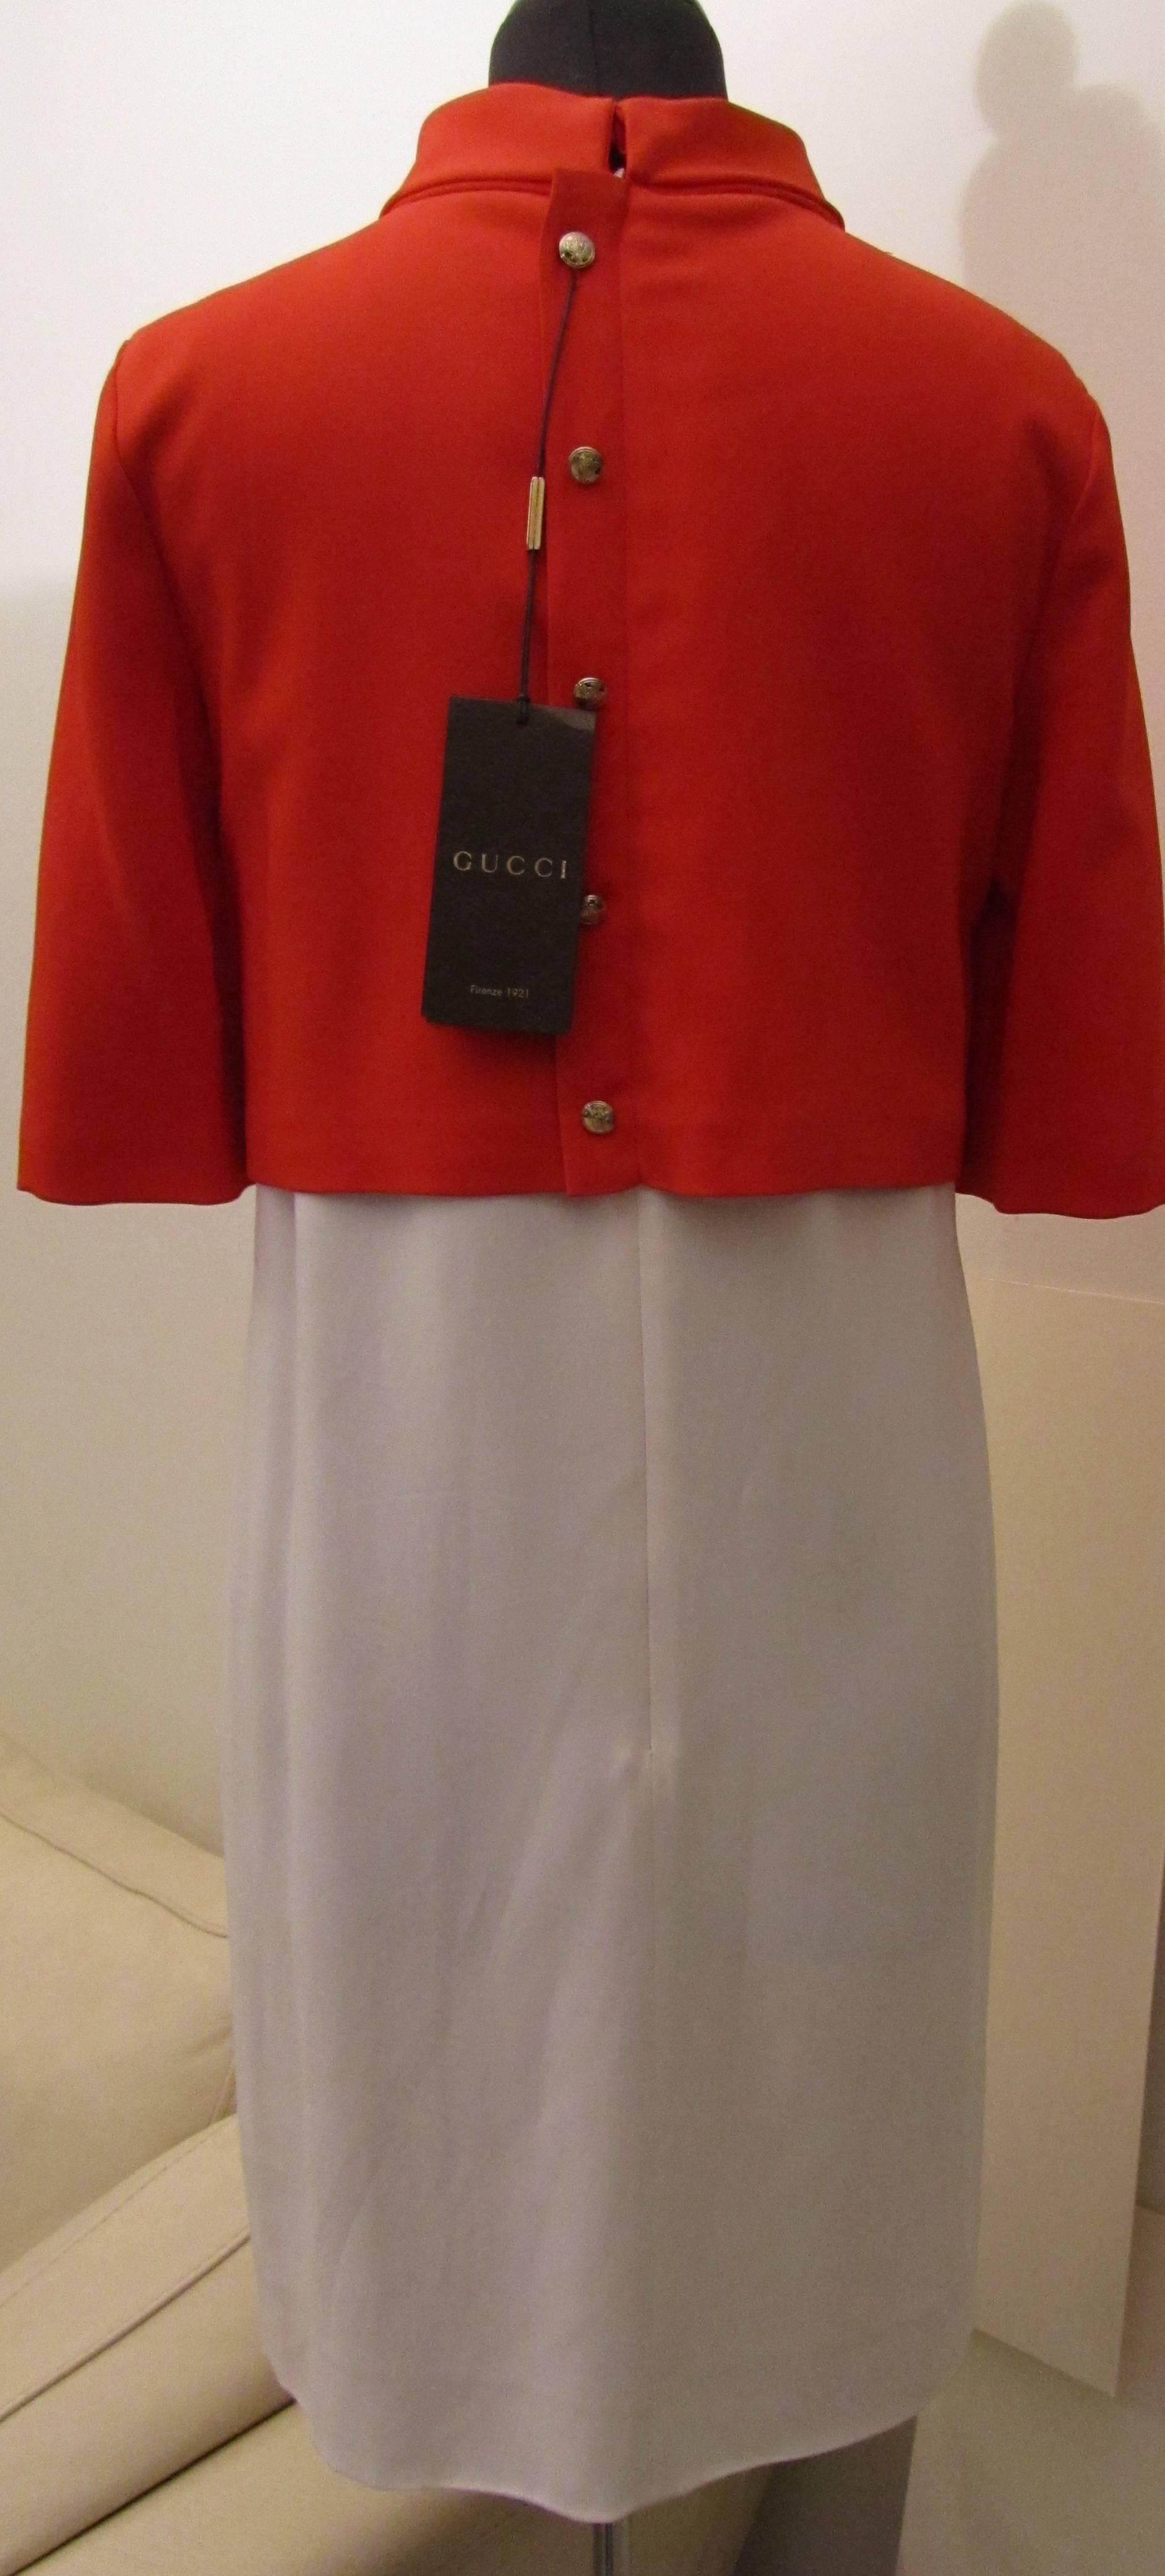 Presented here is a new dress from Gucci. The dress is a size Italian 42 which is equivalent to a USA size 2 to 6. Pay close attention to the measurements. The dress still has its original tags on it and has never been worn. The dress has a white